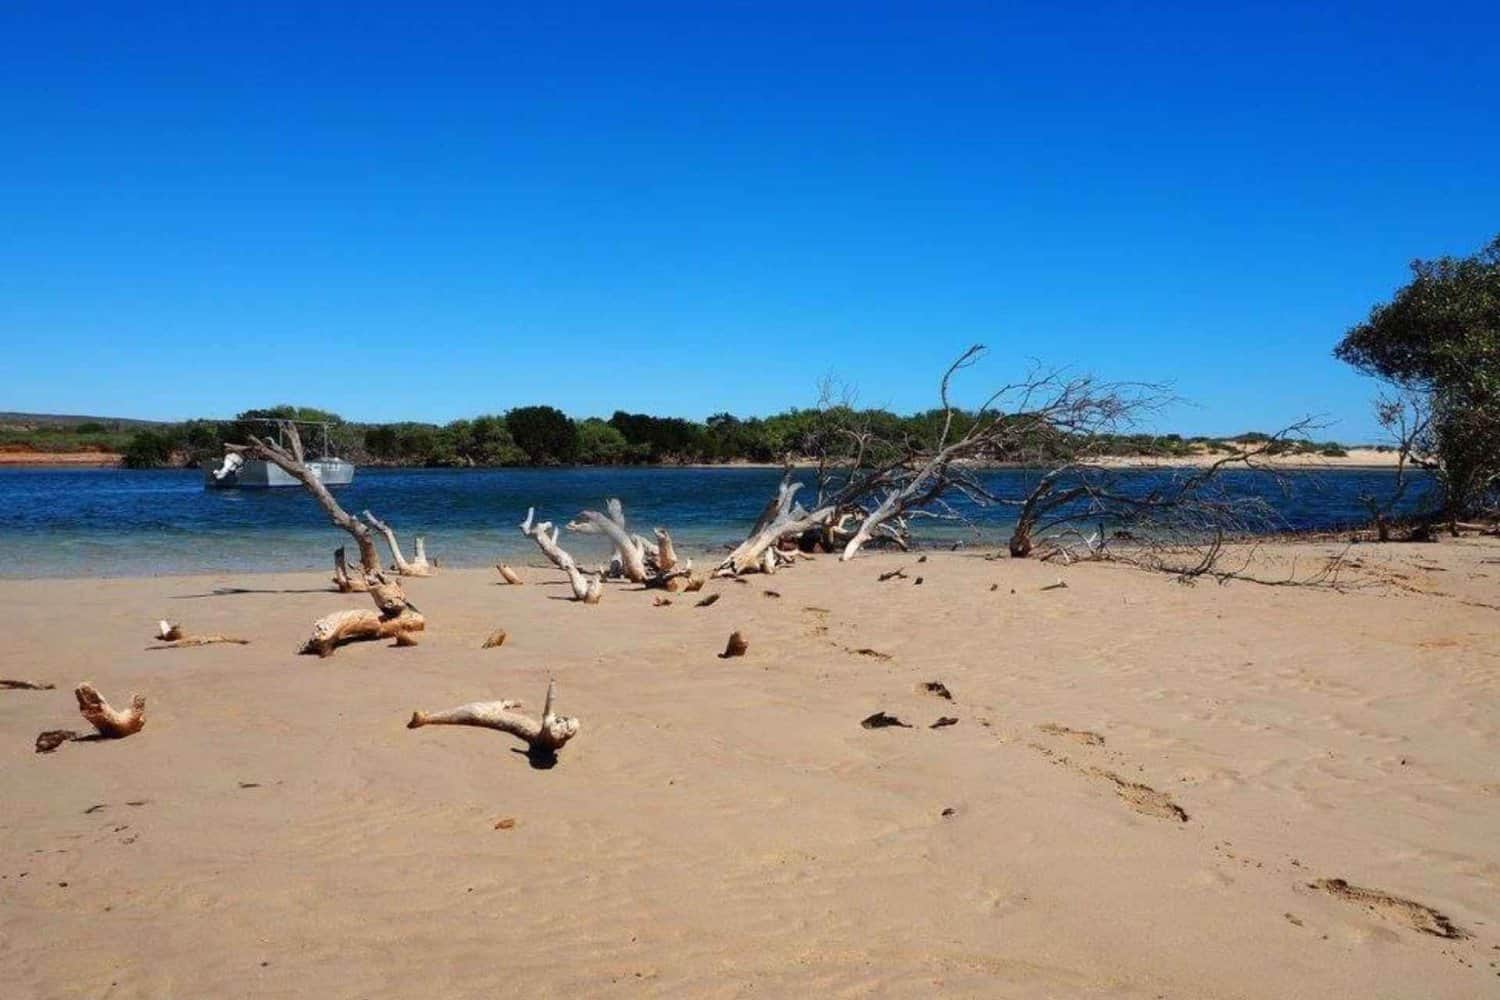 Picturesque scene from Perth to Exmouth journey, featuring a sandy beach, trees, and a boat gently floating on serene waters